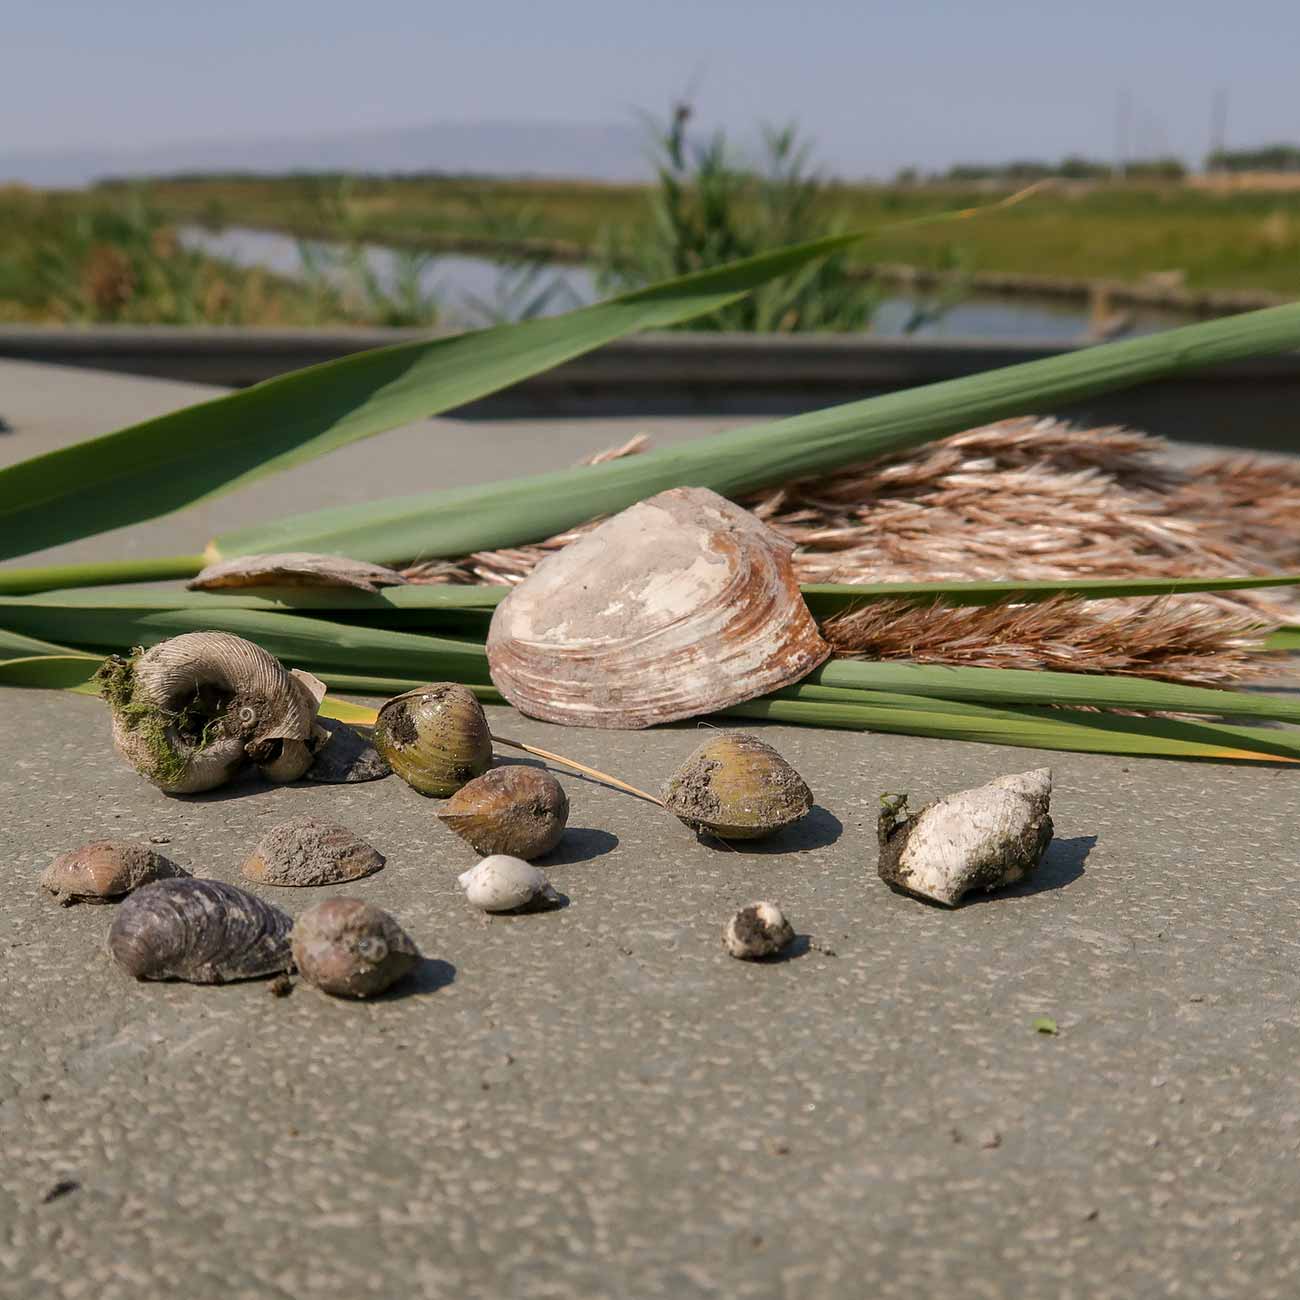 Examples of quagga mussels on a boat